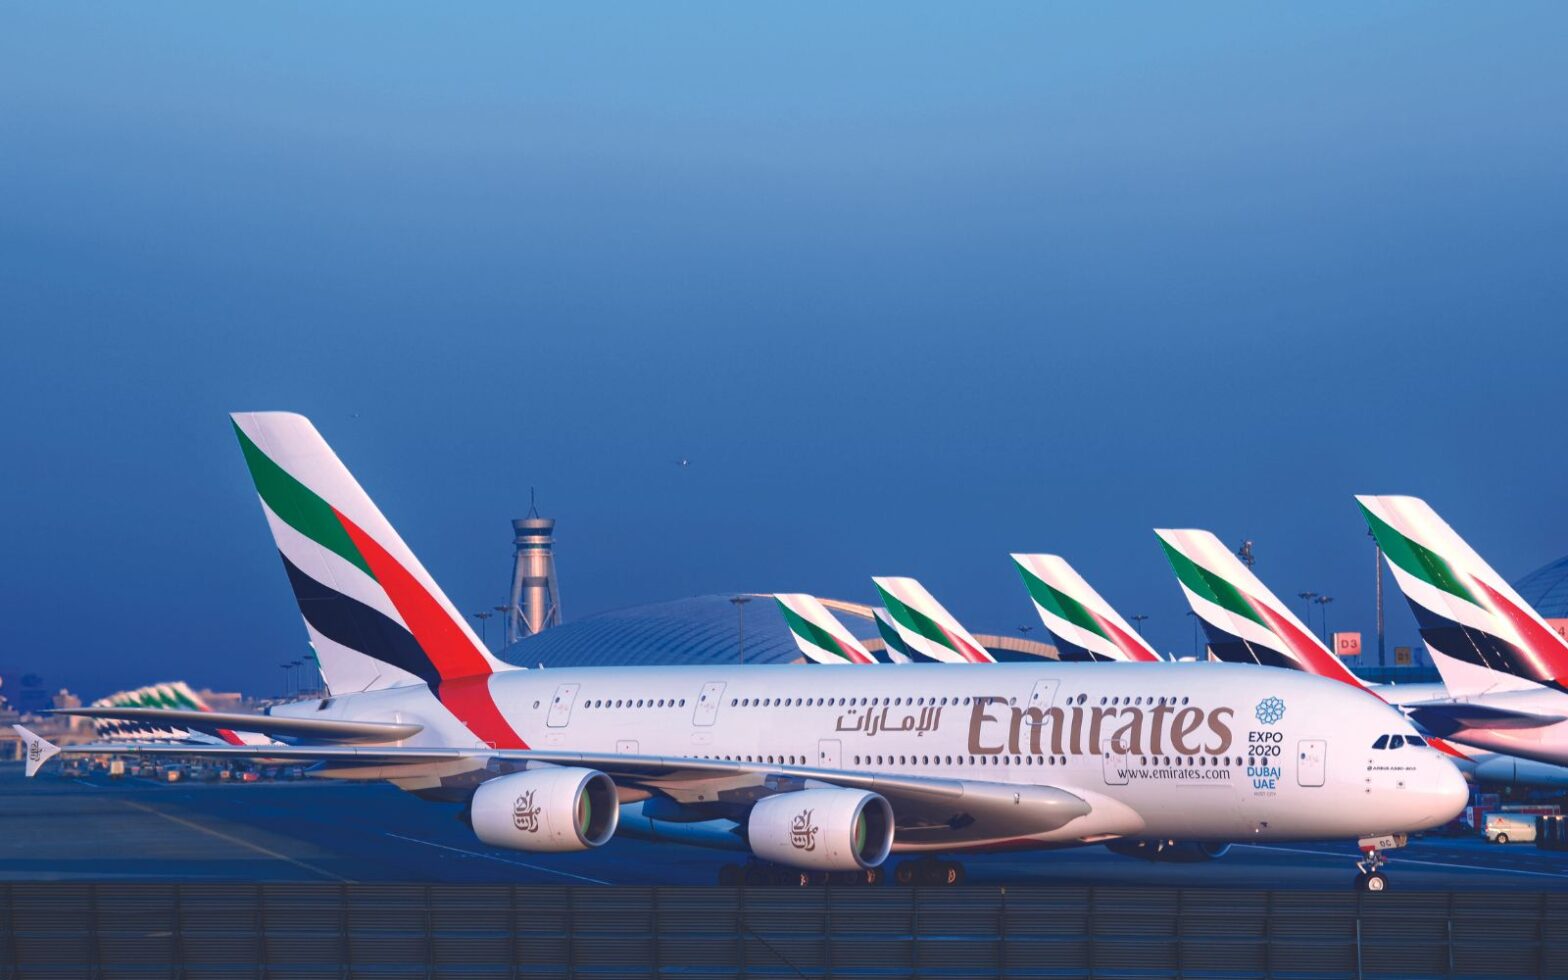 Emirates Now Offers Free Wi-Fi On All Flights